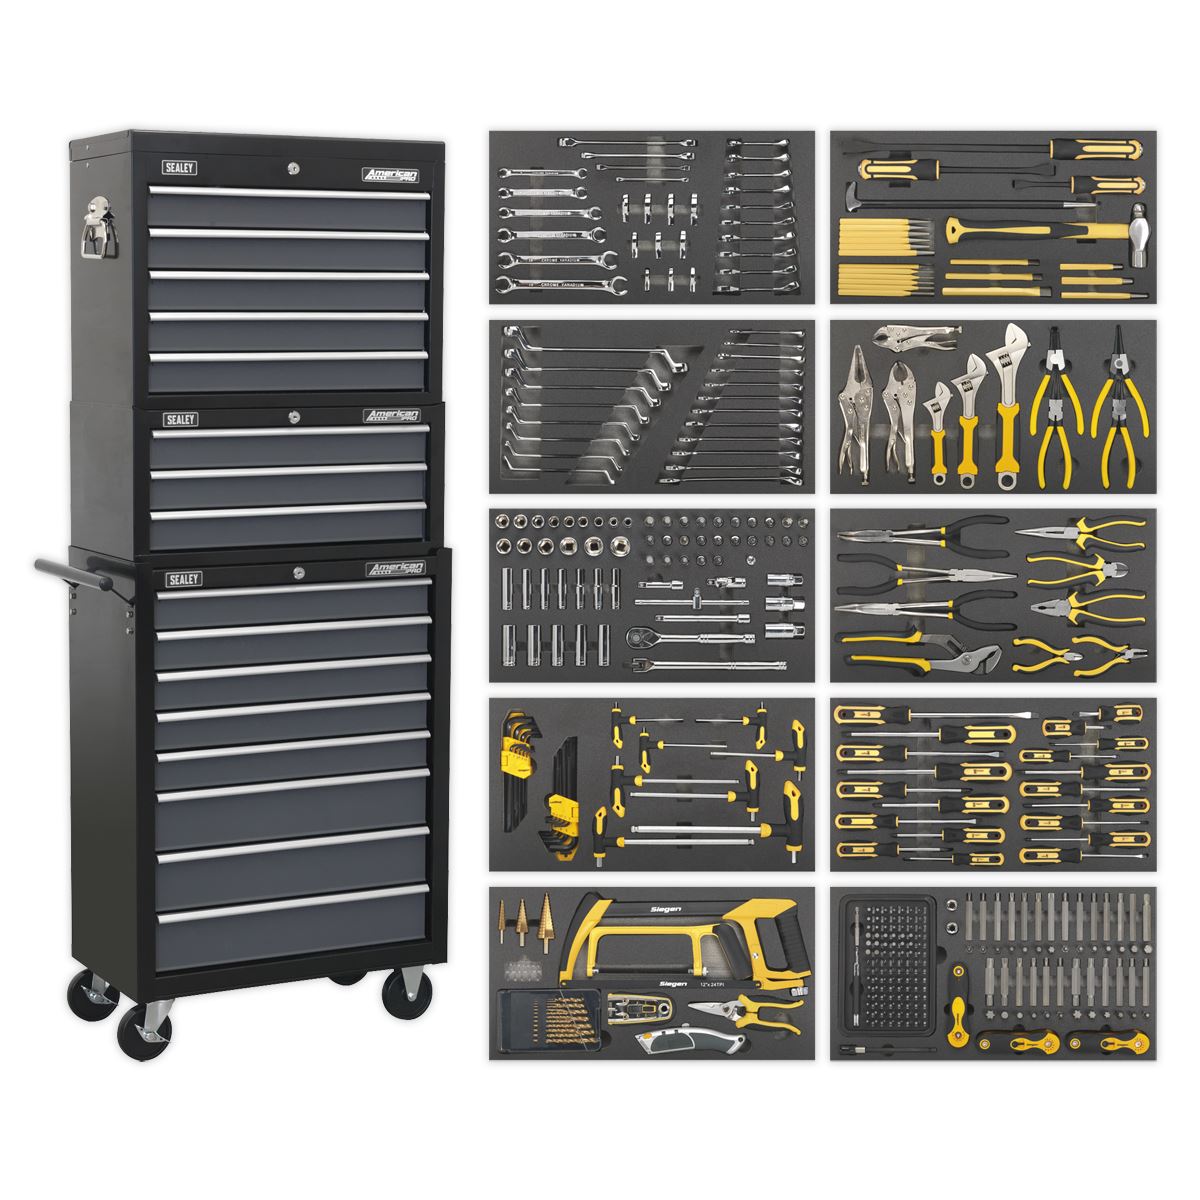 Sealey American Pro Tool Chest Combination 16 Drawer with Ball-Bearing Slides - Black/Grey & 420pc Tool Kit